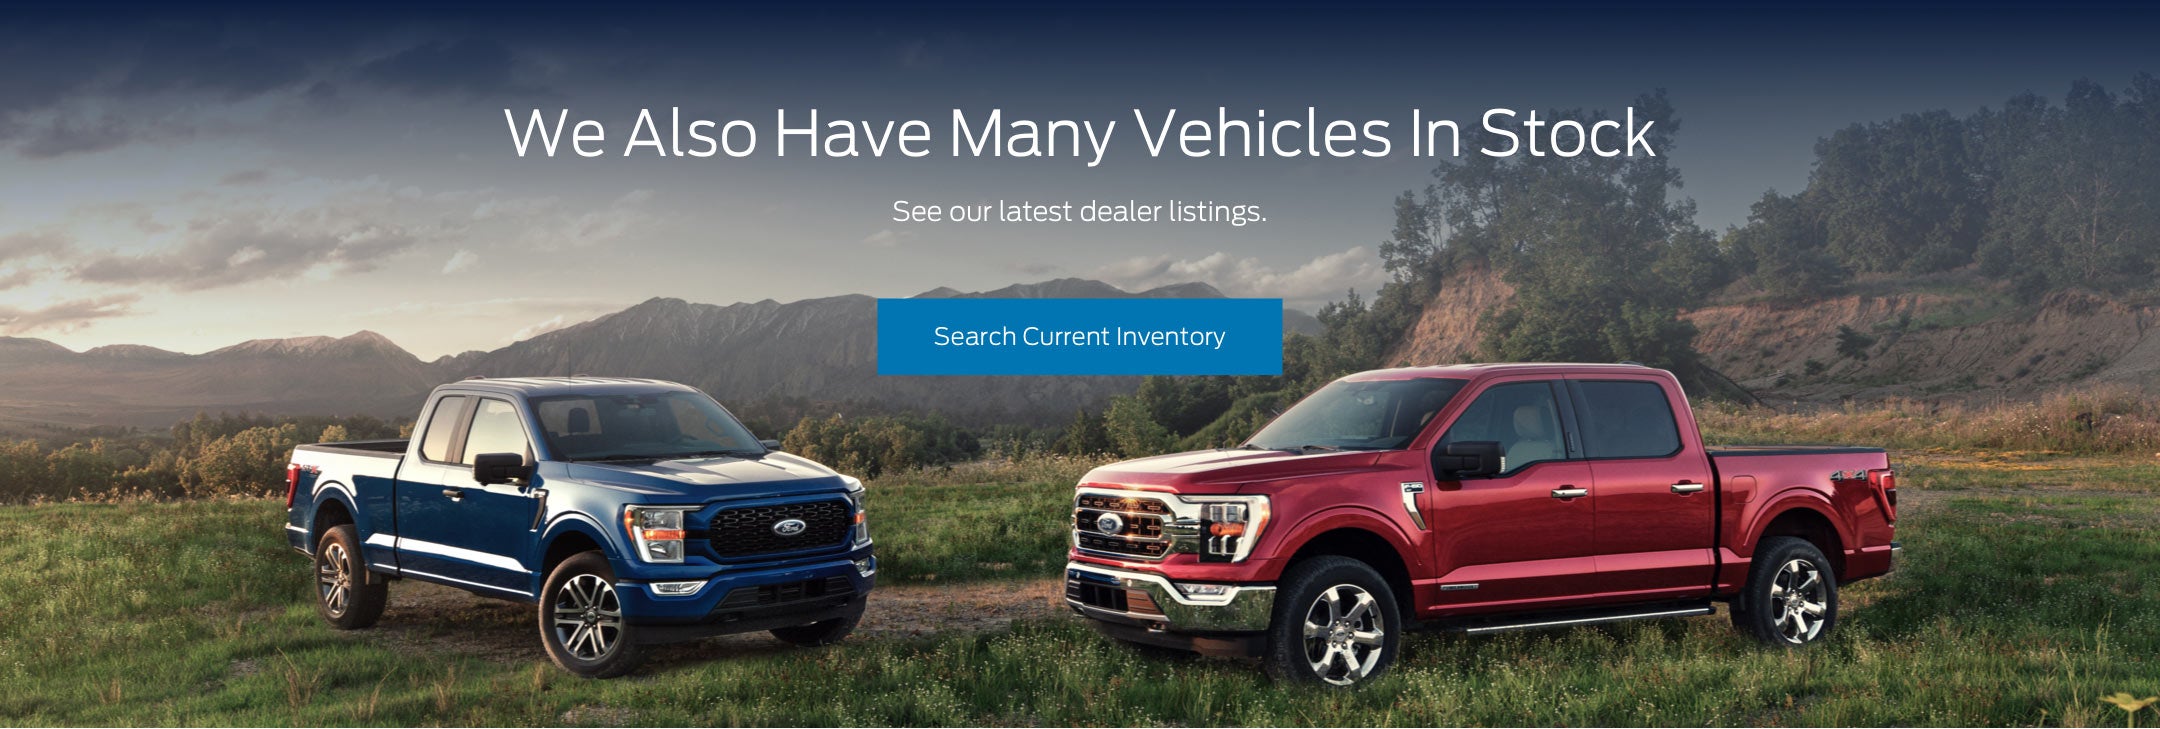 Ford vehicles in stock | Thief River Ford in Thief River Falls MN